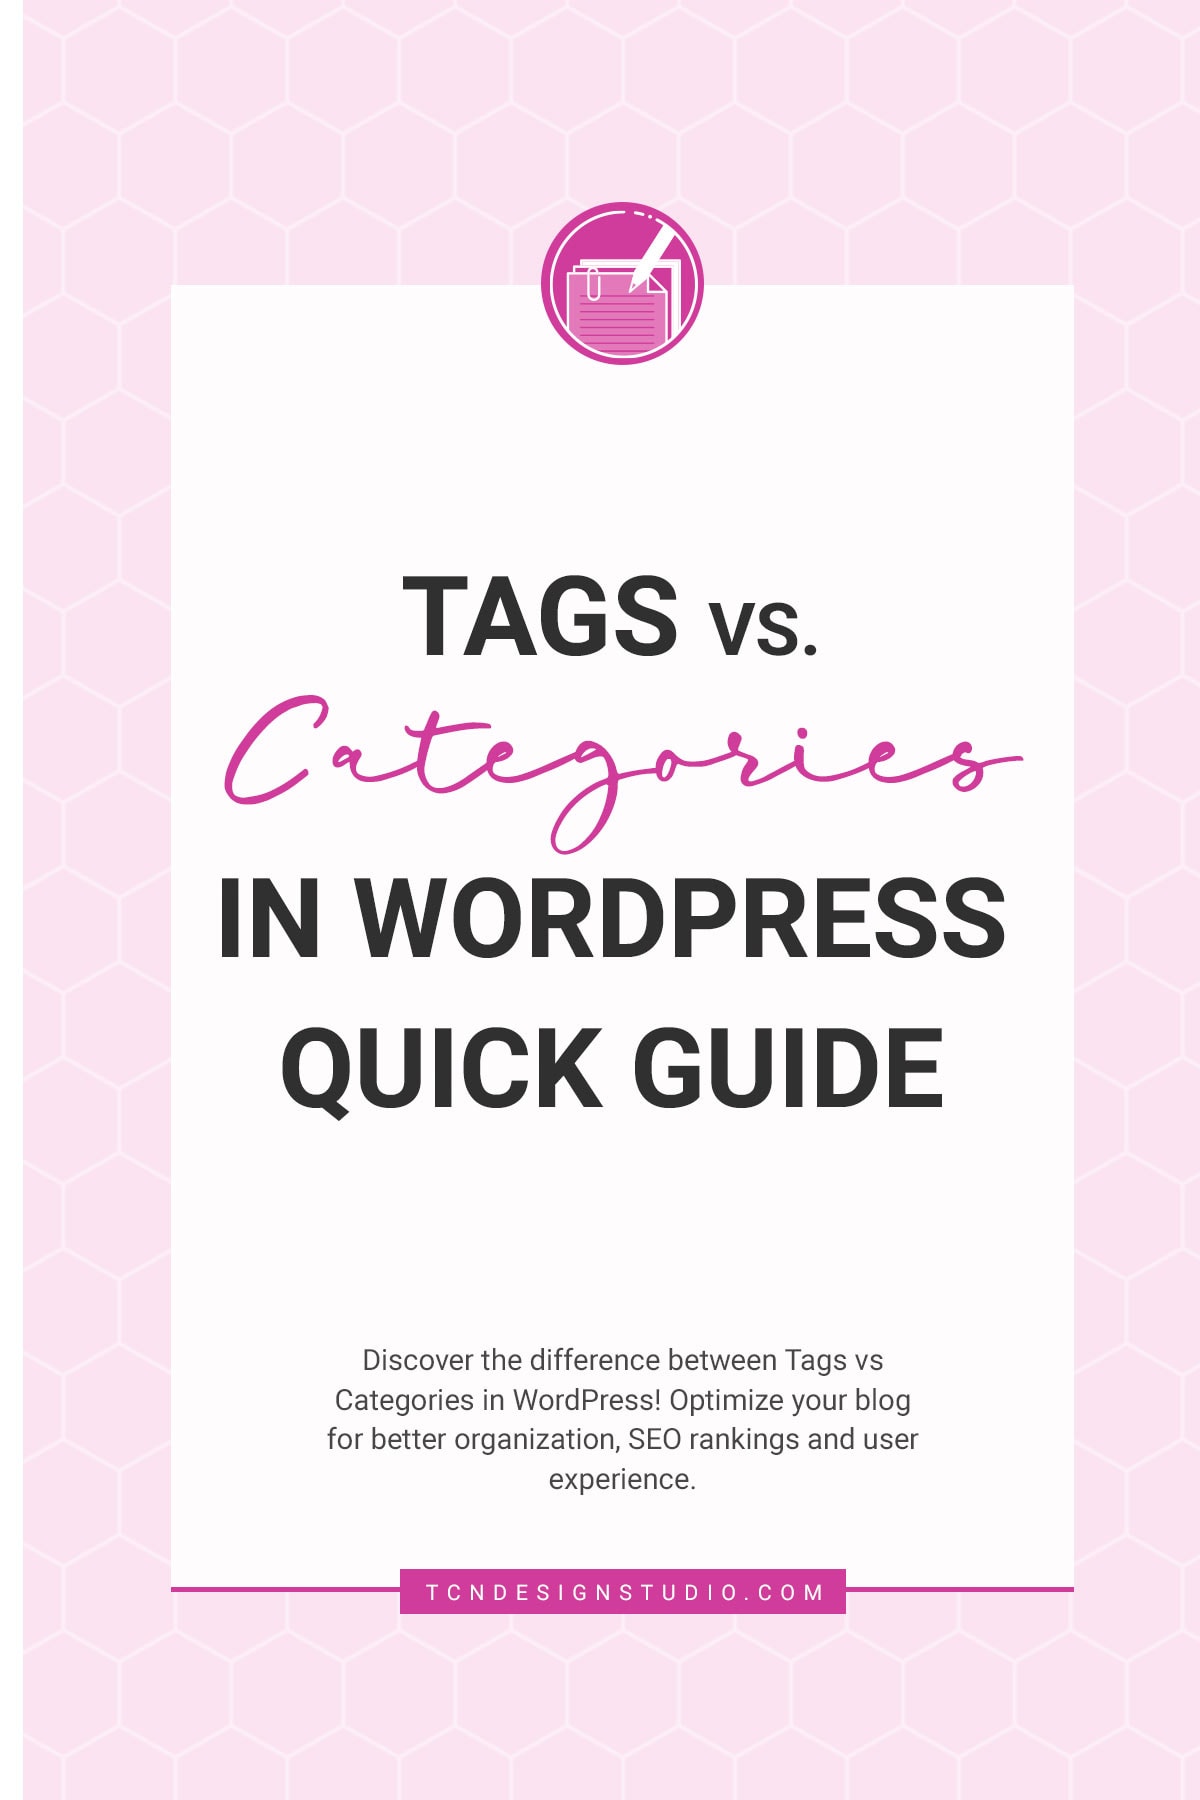 Tags vs Categories in WordPress Quick Guide